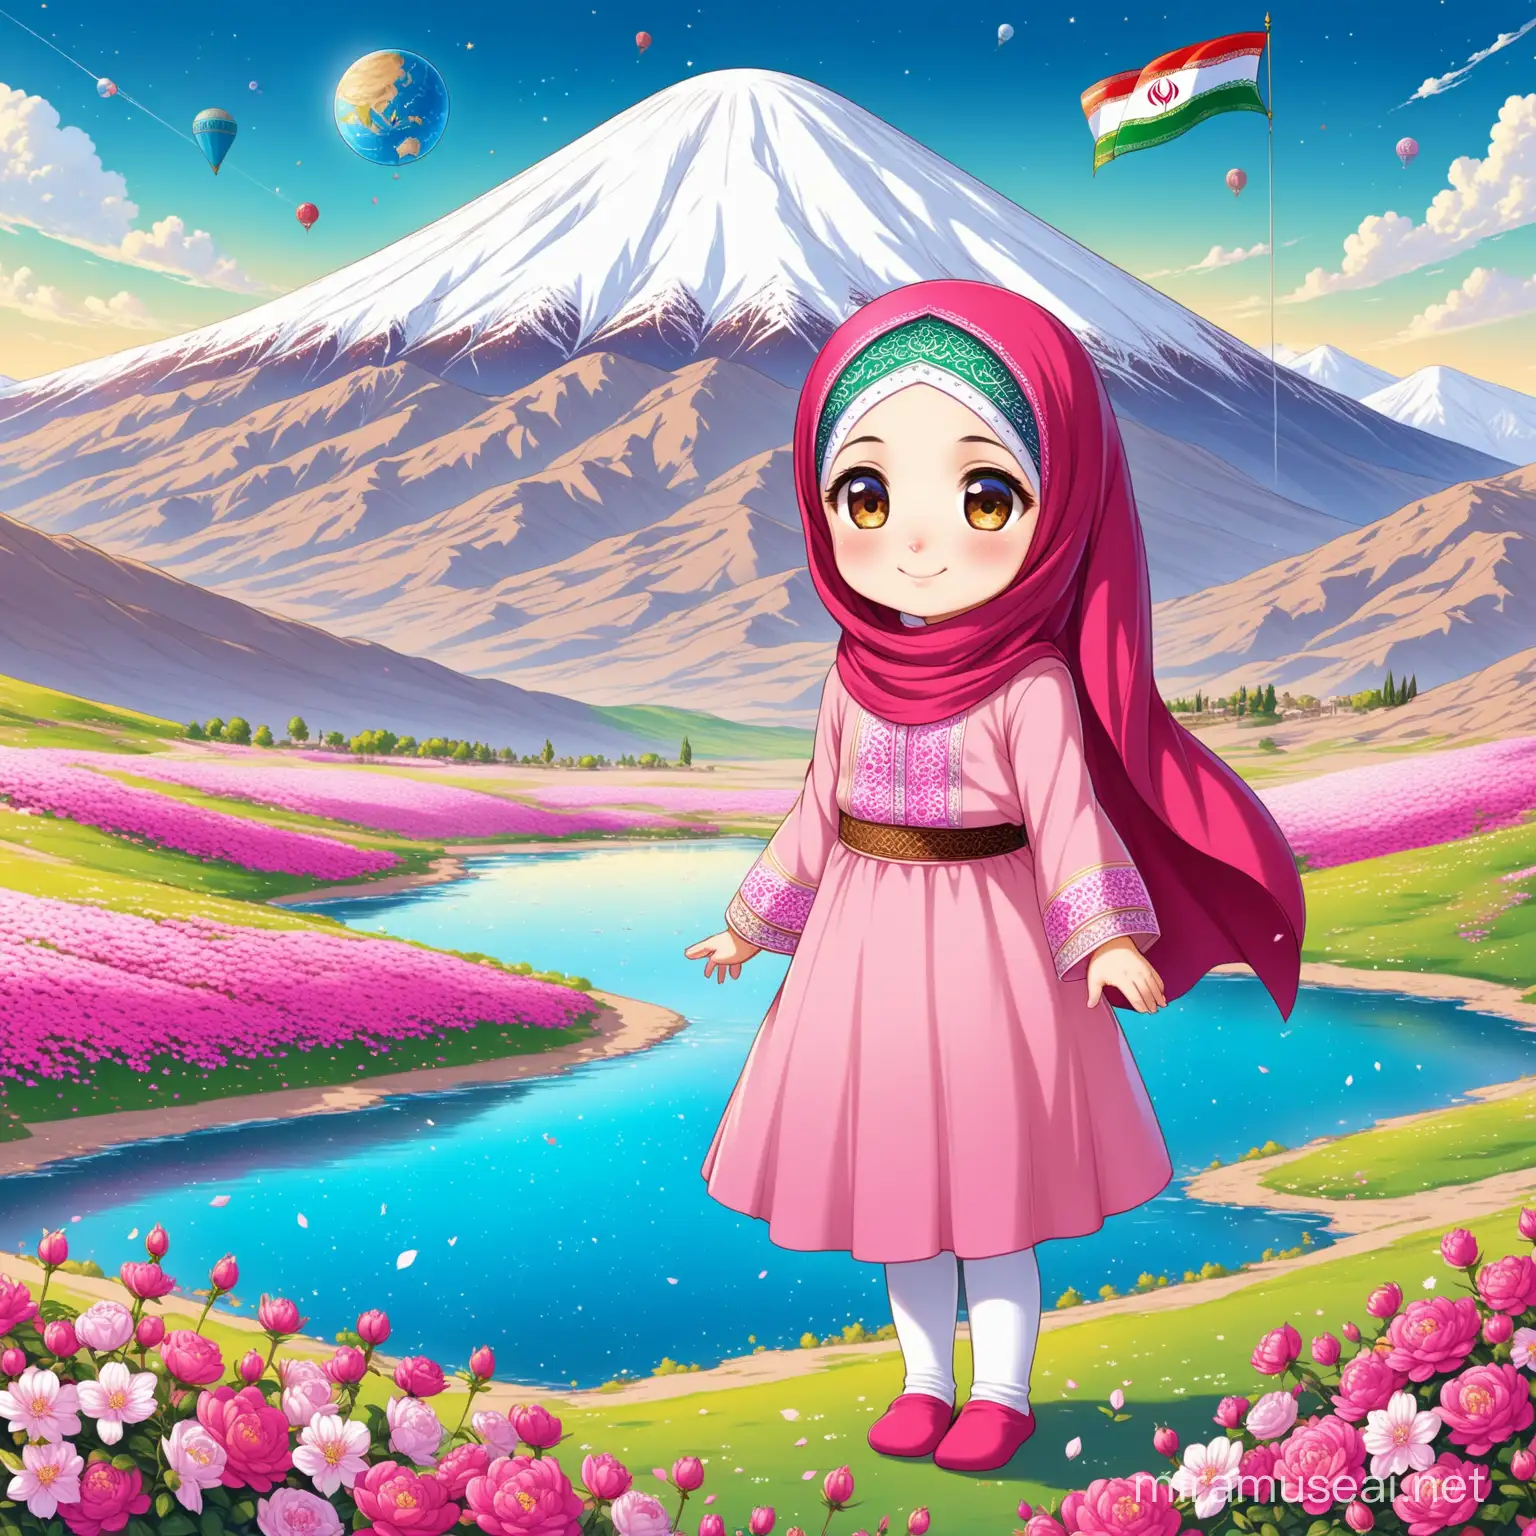 Persian Little Girl in Traditional Clothing Smiling at Damavand Mountain with Iranian Flag and Pink Flowers